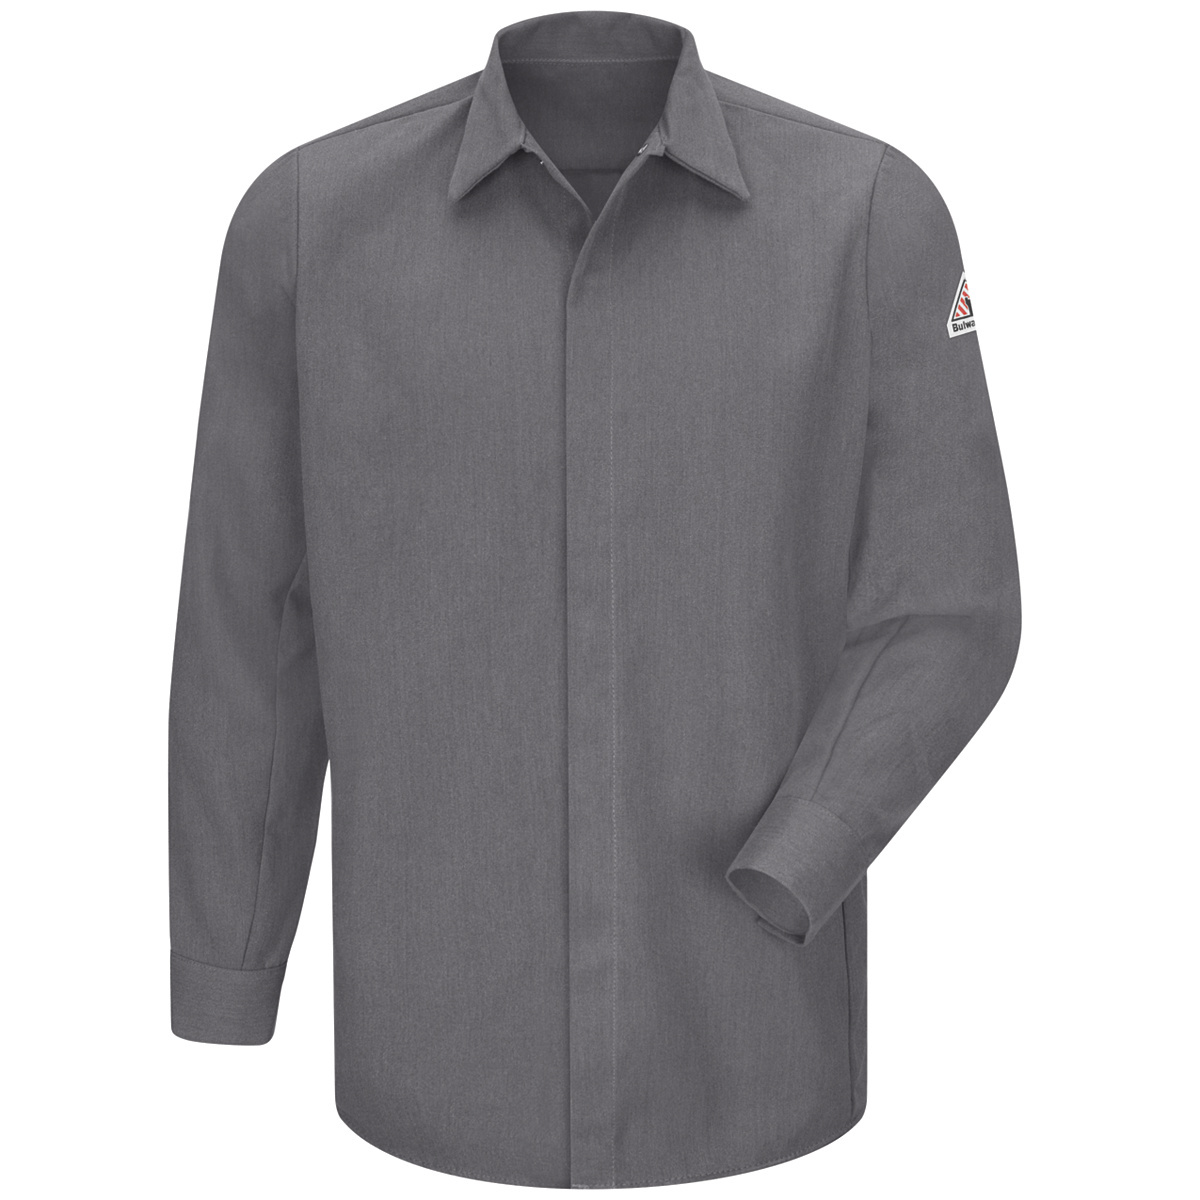 Bulwark® Small| Regular Gray CoolTouch®/Modacrylic/Lyocell/Aramid Flame Resistant Work Shirt With Gripper Front Closure